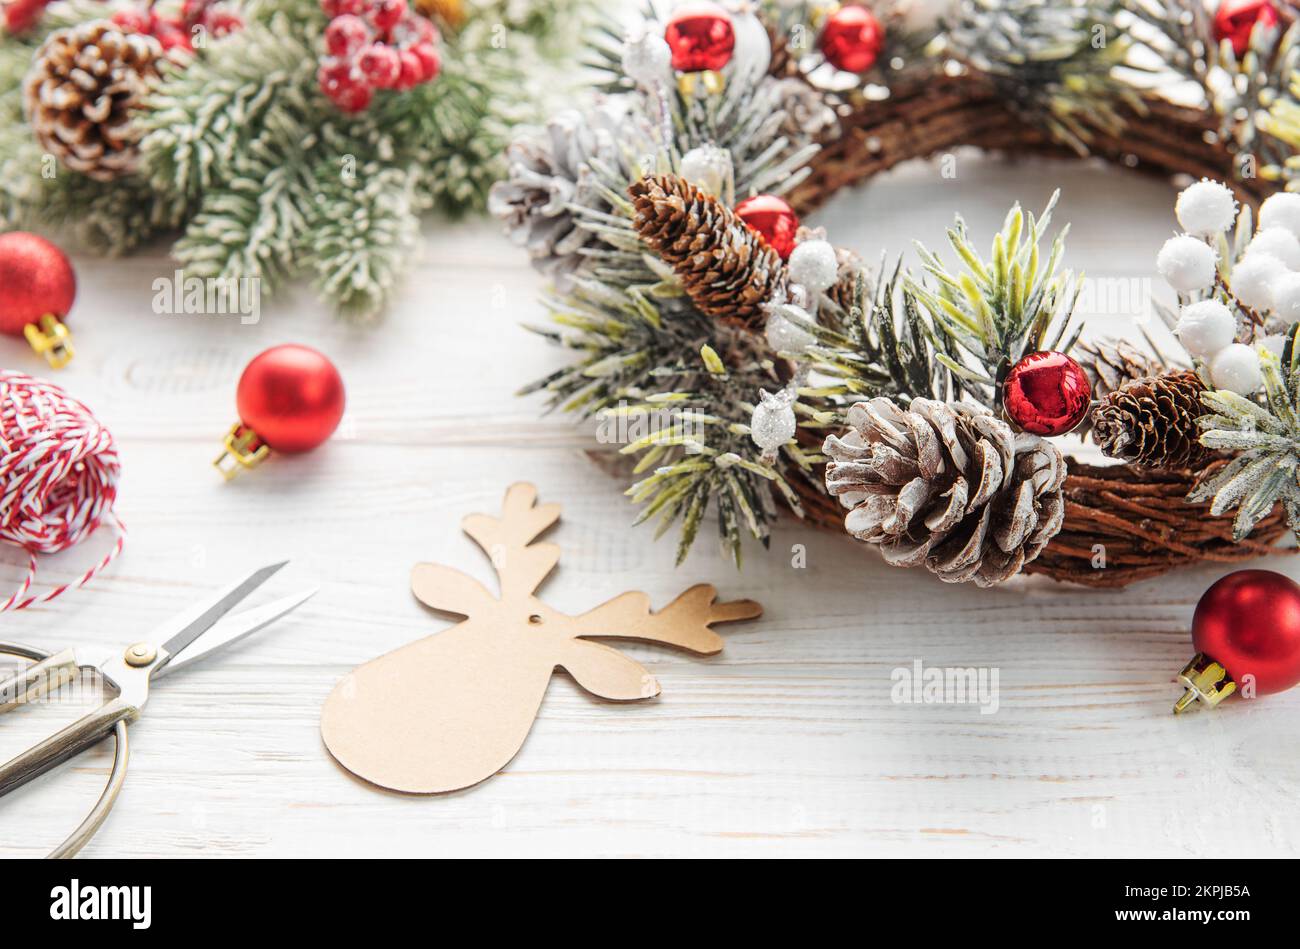 Decorative festive Christmas wreath. Wreath made of fir tree and cones on a old wooden background. Christmas decorations Stock Photo